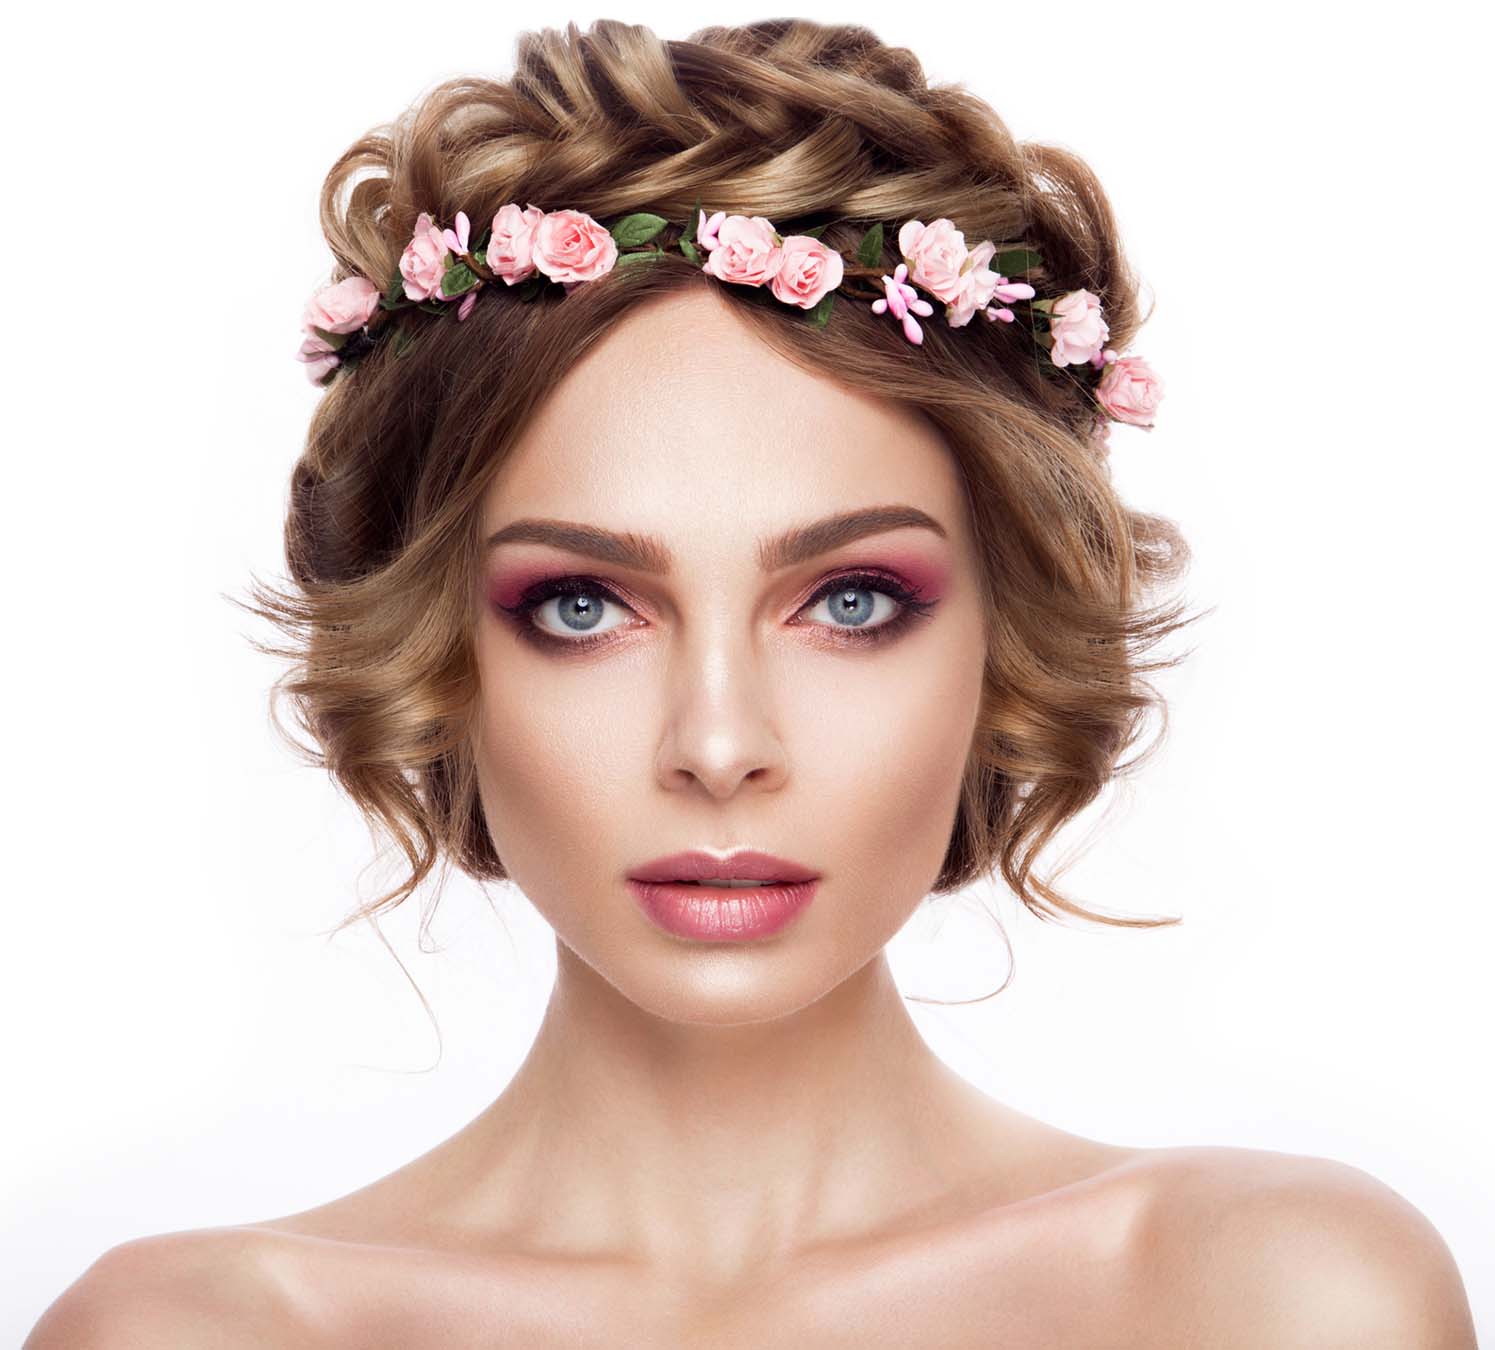 Fashion Beauty Model Girl with Flowers Hair. Bride. Perfect Creative Make up and Hair Style. Hairstyle.